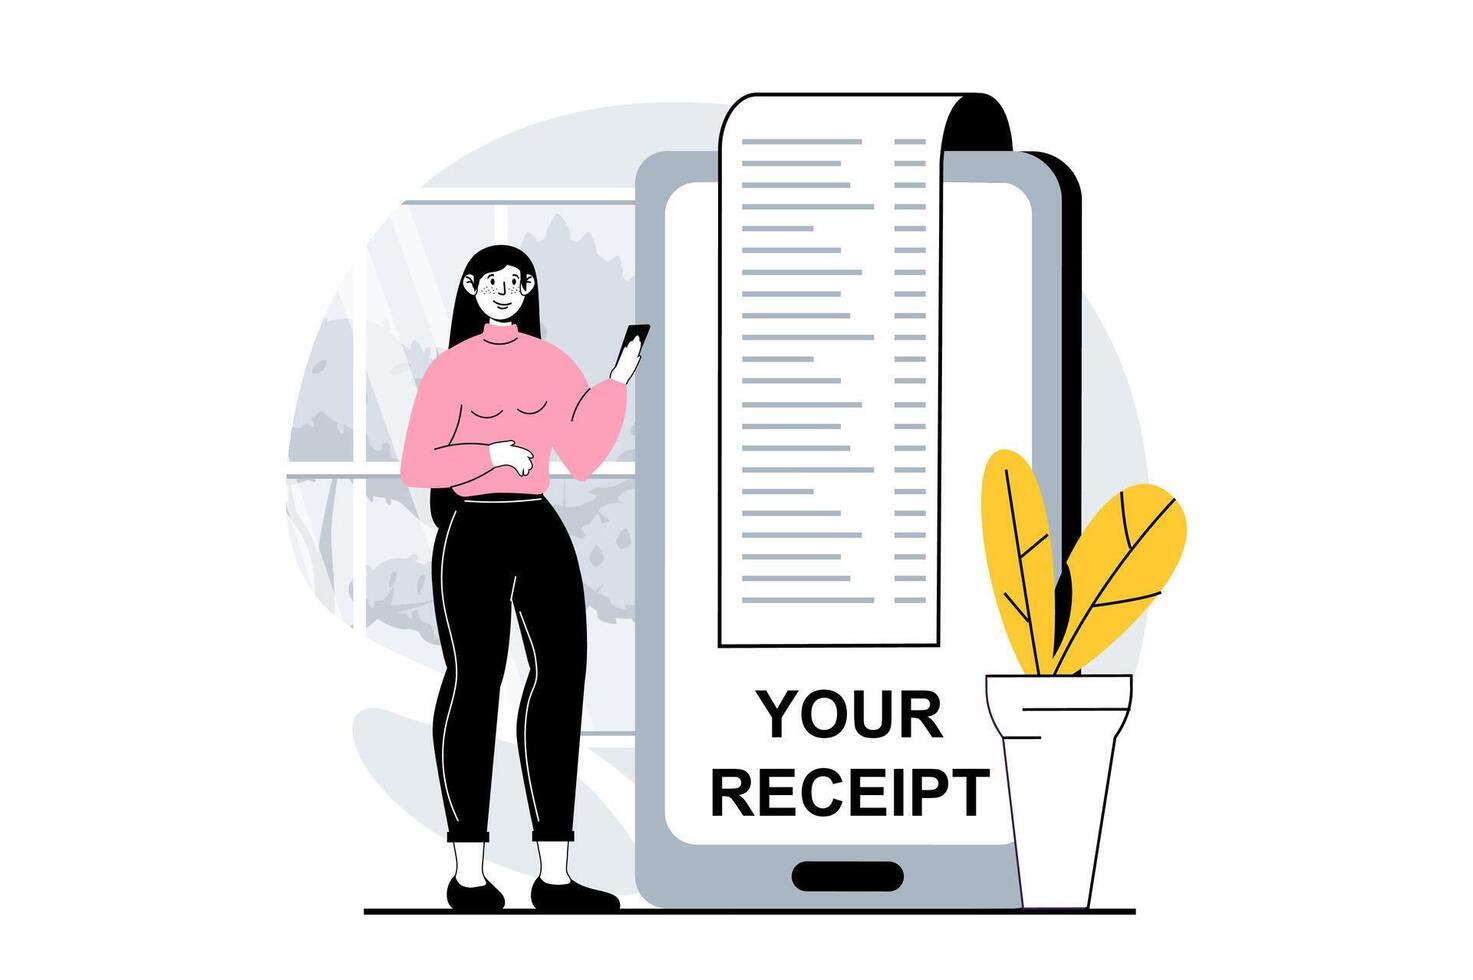 Electronic receipt concept with people scene in flat design for web. Woman receiving digital check and paying in mobile application. Vector illustration for social media banner, marketing material.